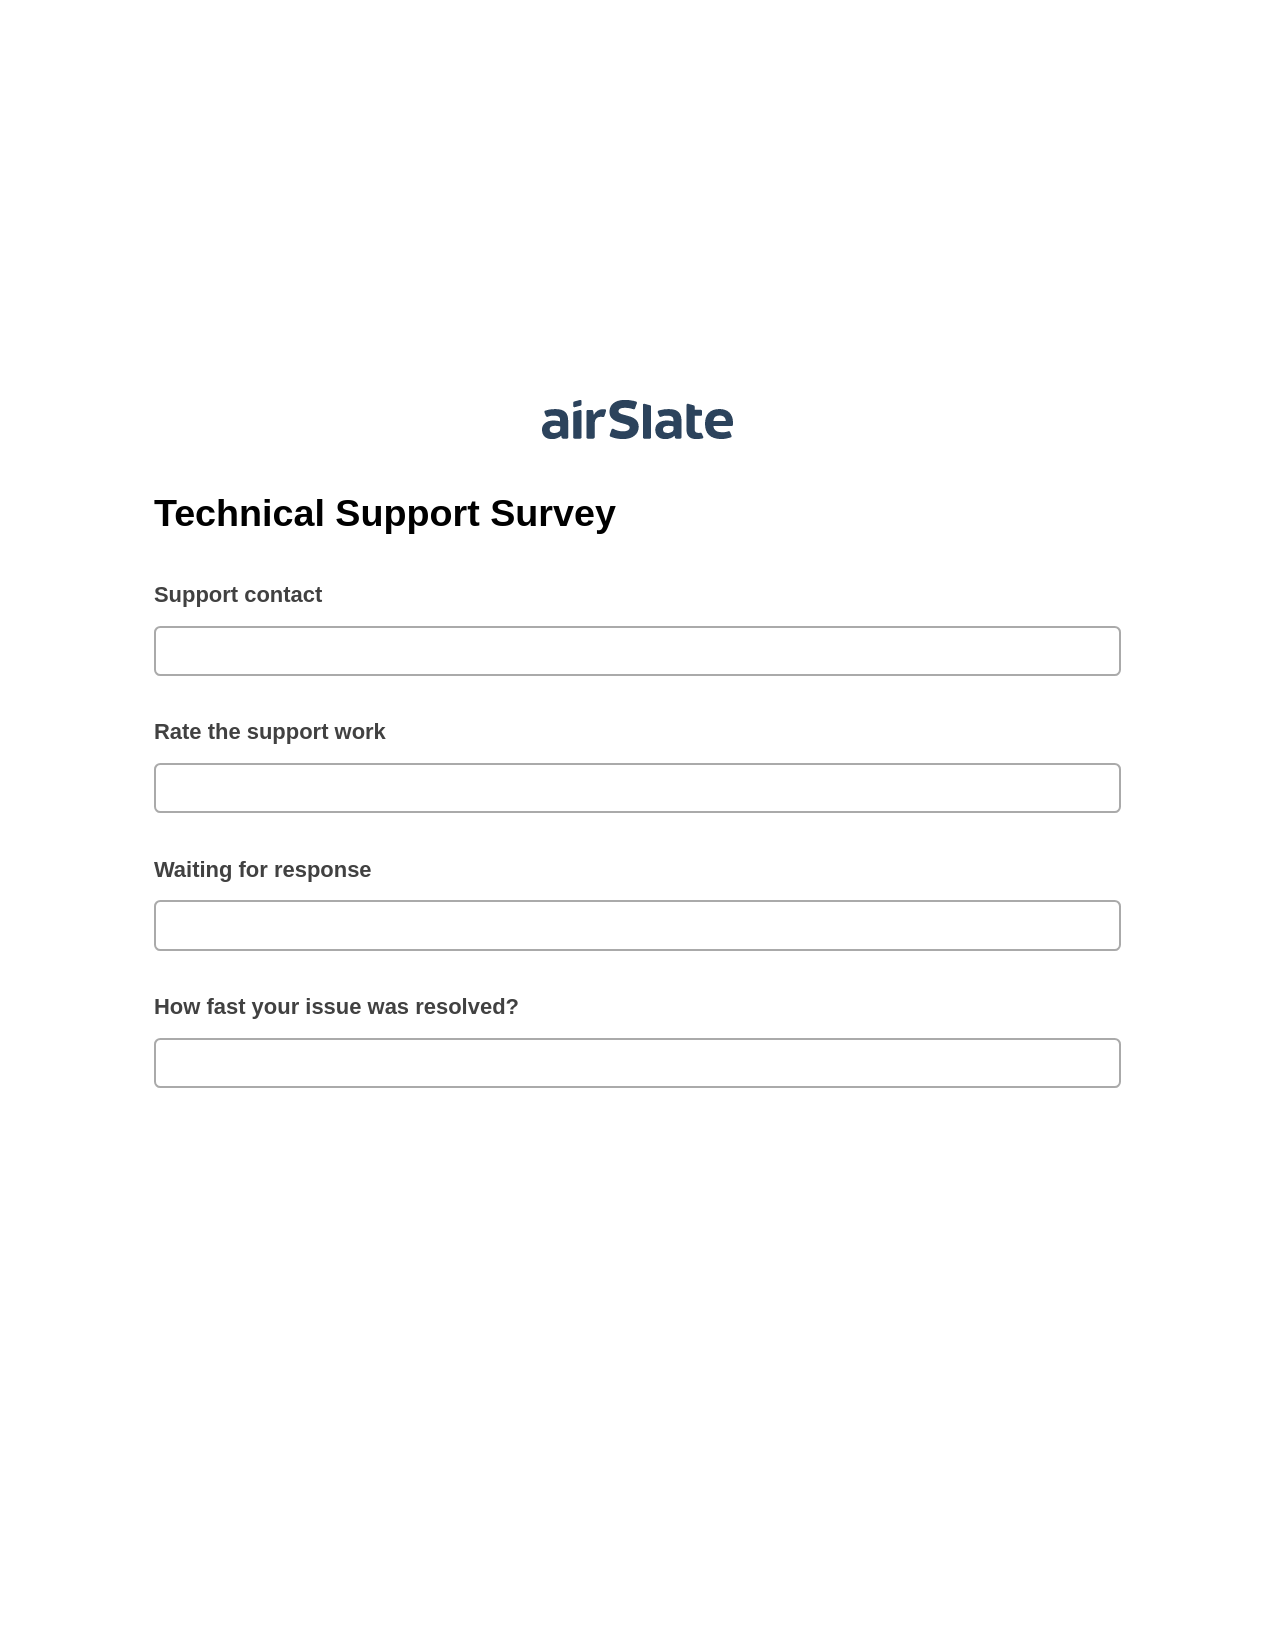 Multirole Technical Support Survey Pre-fill from MySQL Bot, Lock the Slate Bot, Export to Excel 365 Bot